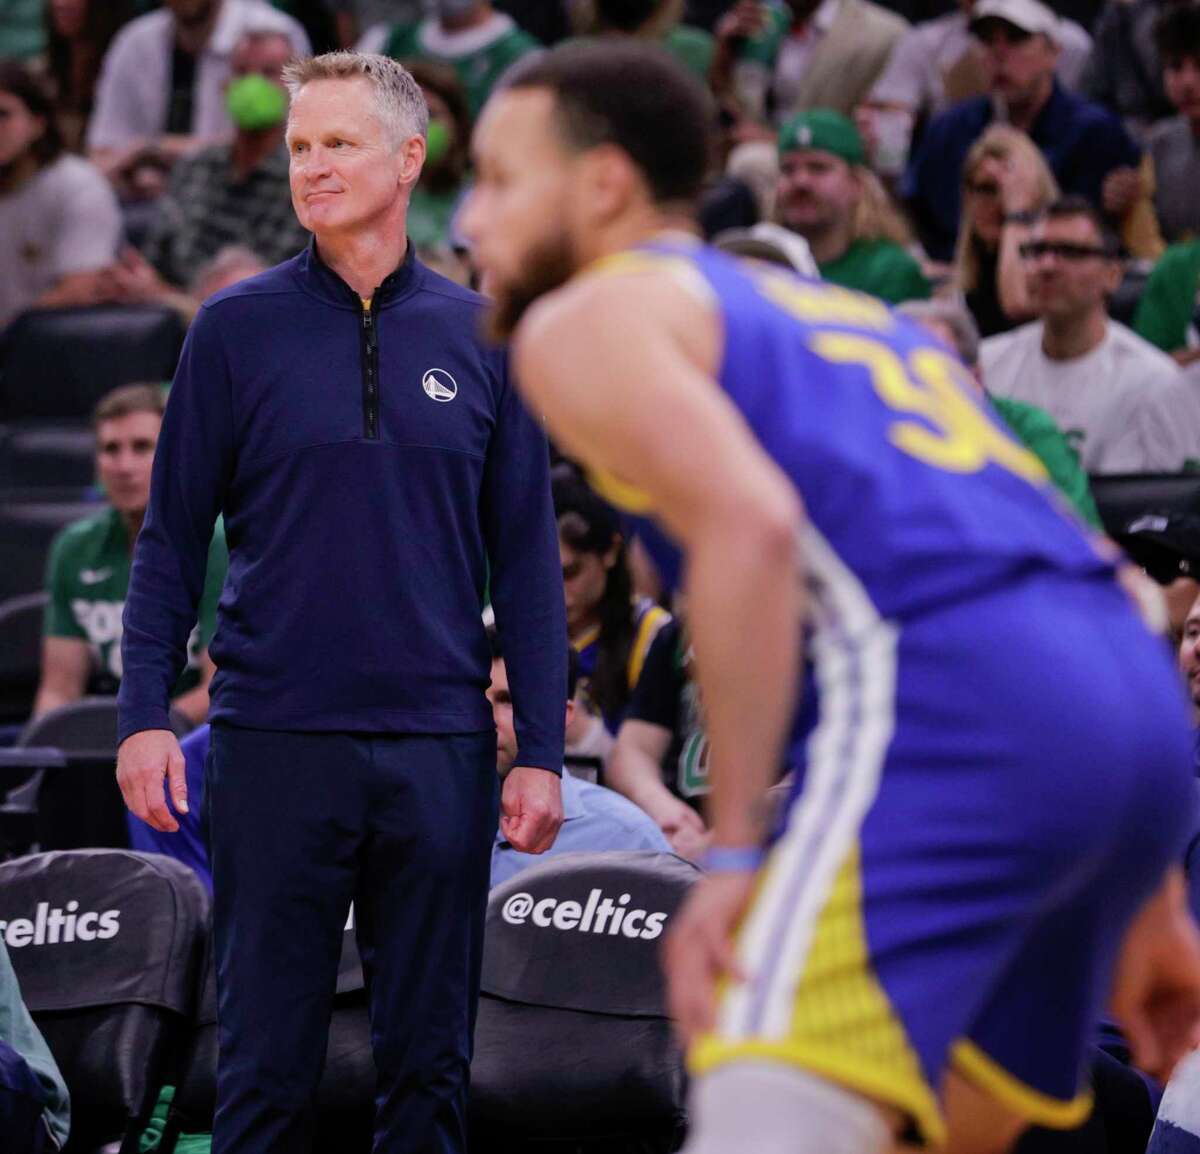 Golden State Warriors' Steve Kerr watches the action during the third quarter in Game 6 of the NBA Finals at TD Garden in Boston, Mass., on Thursday, June 16, 2022.